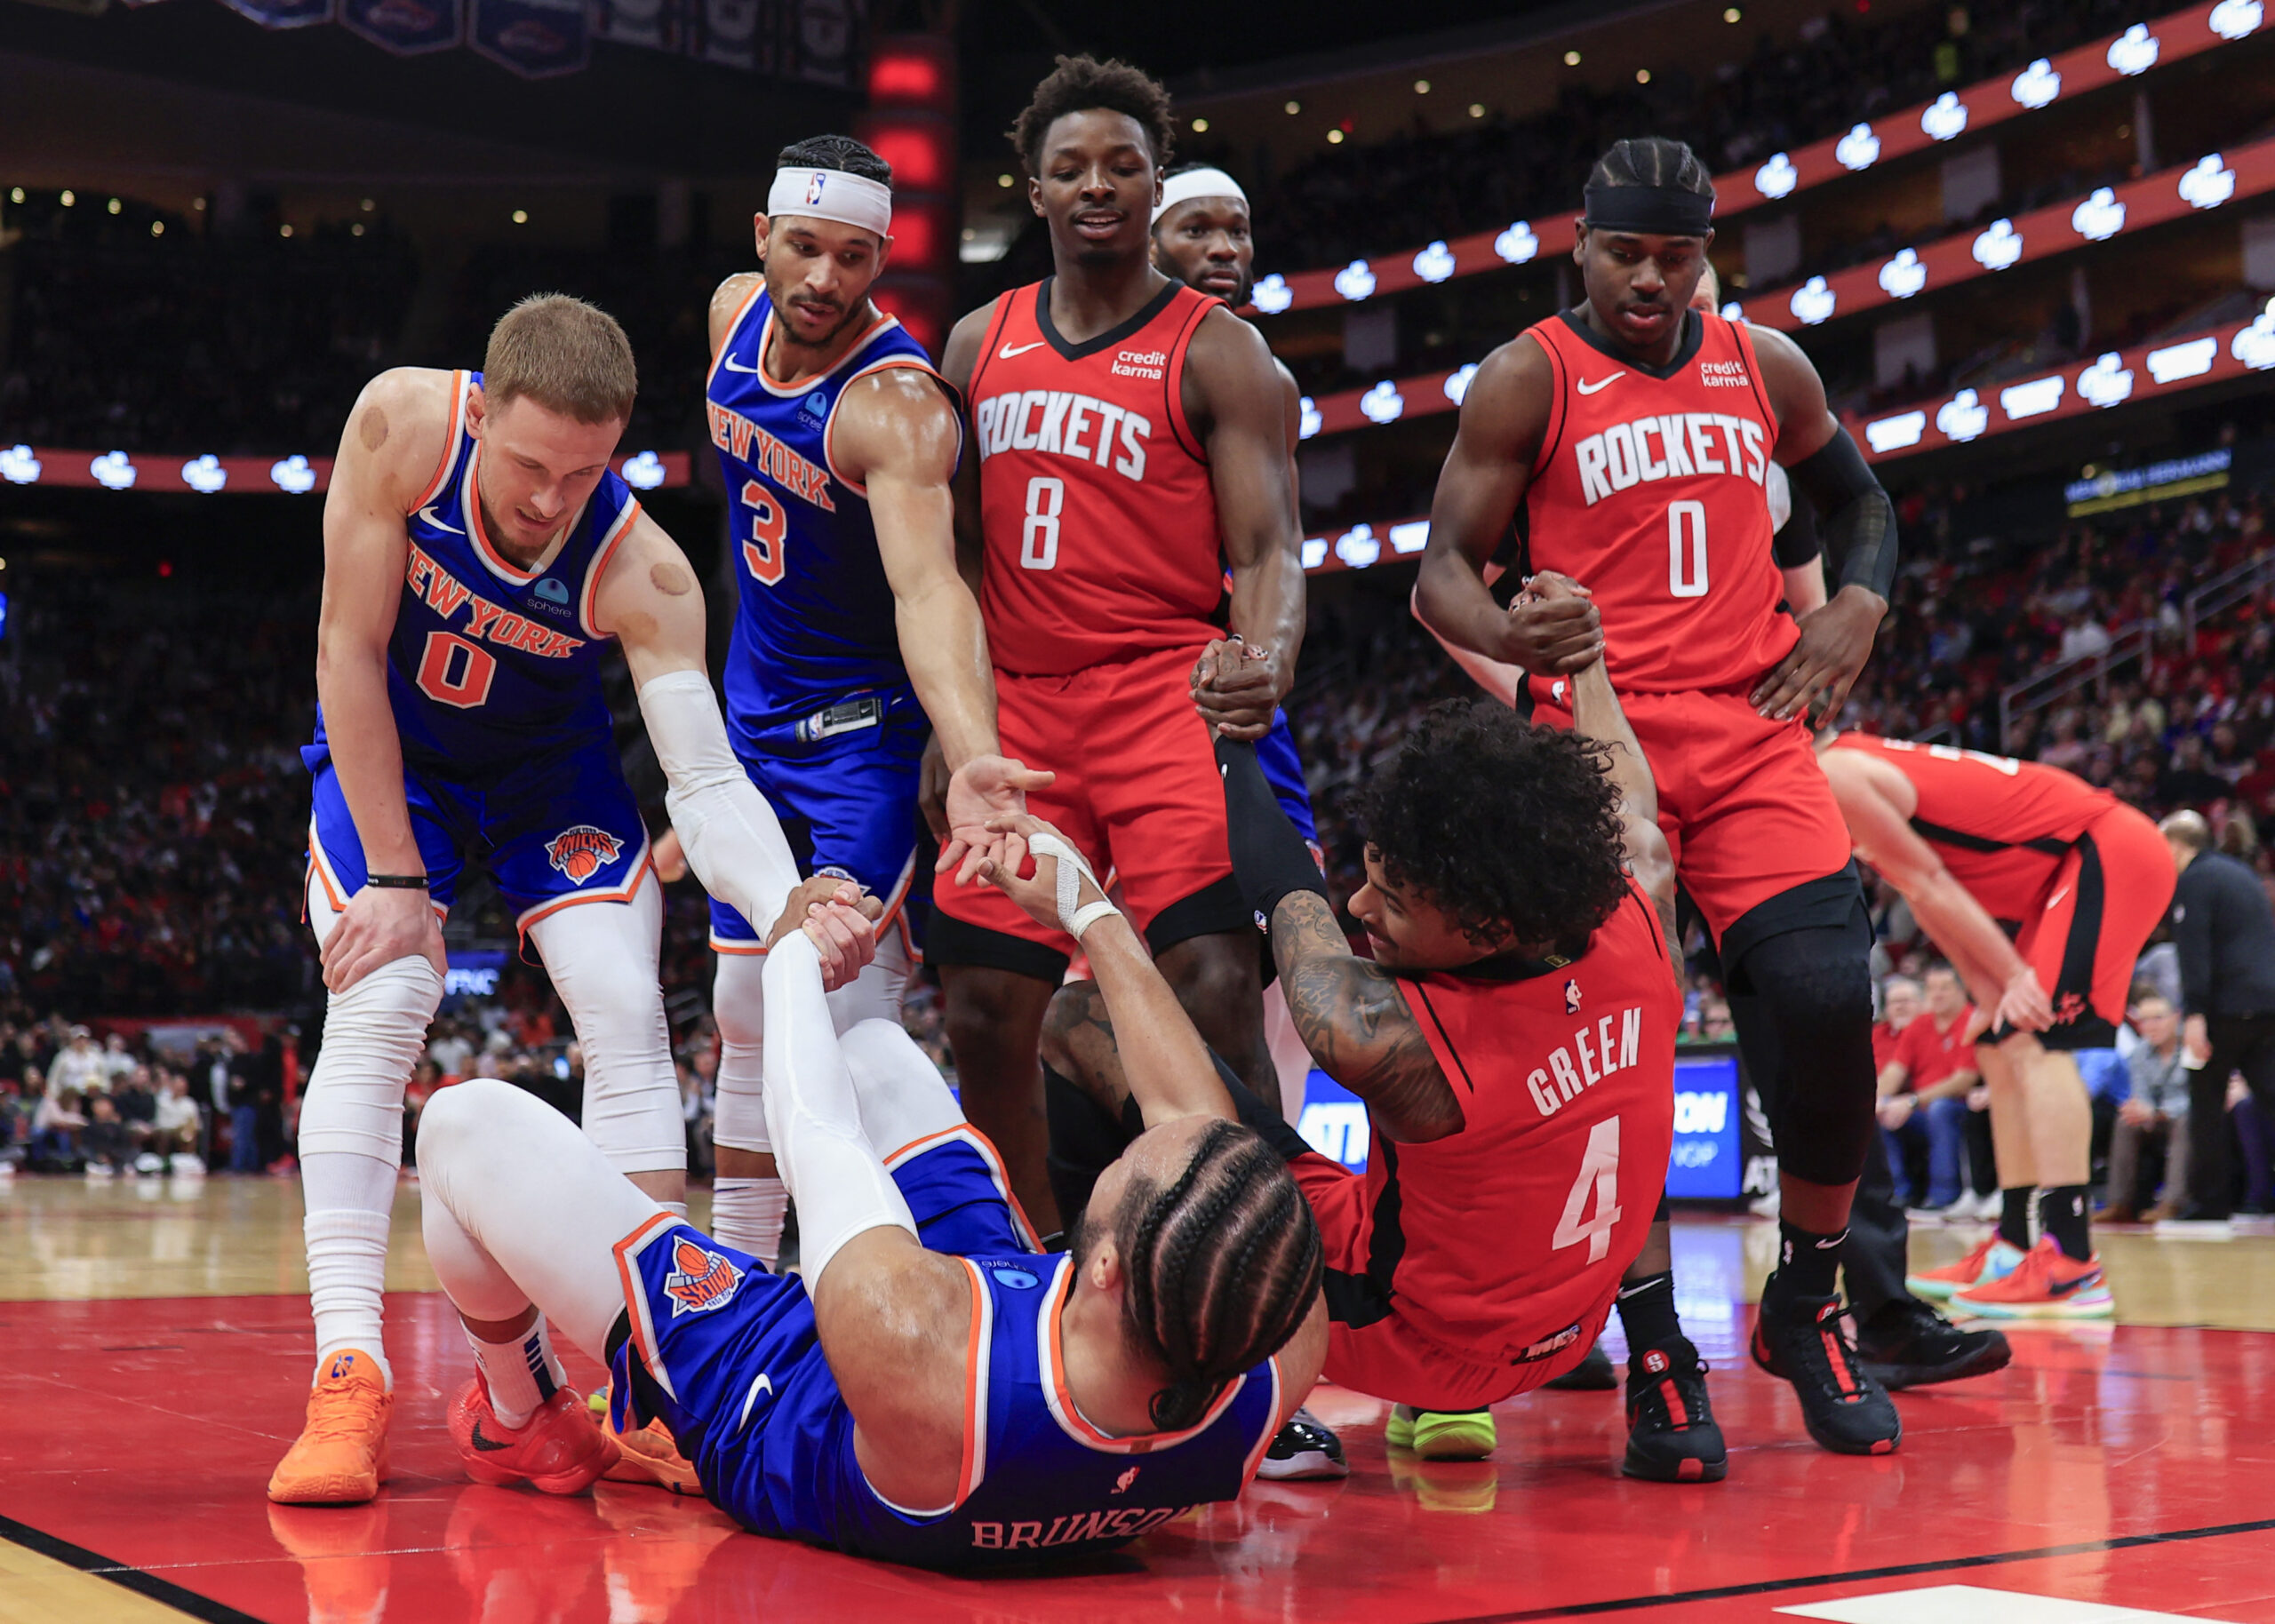 nba denies knicks protest, saying referee error not grounds to overturn